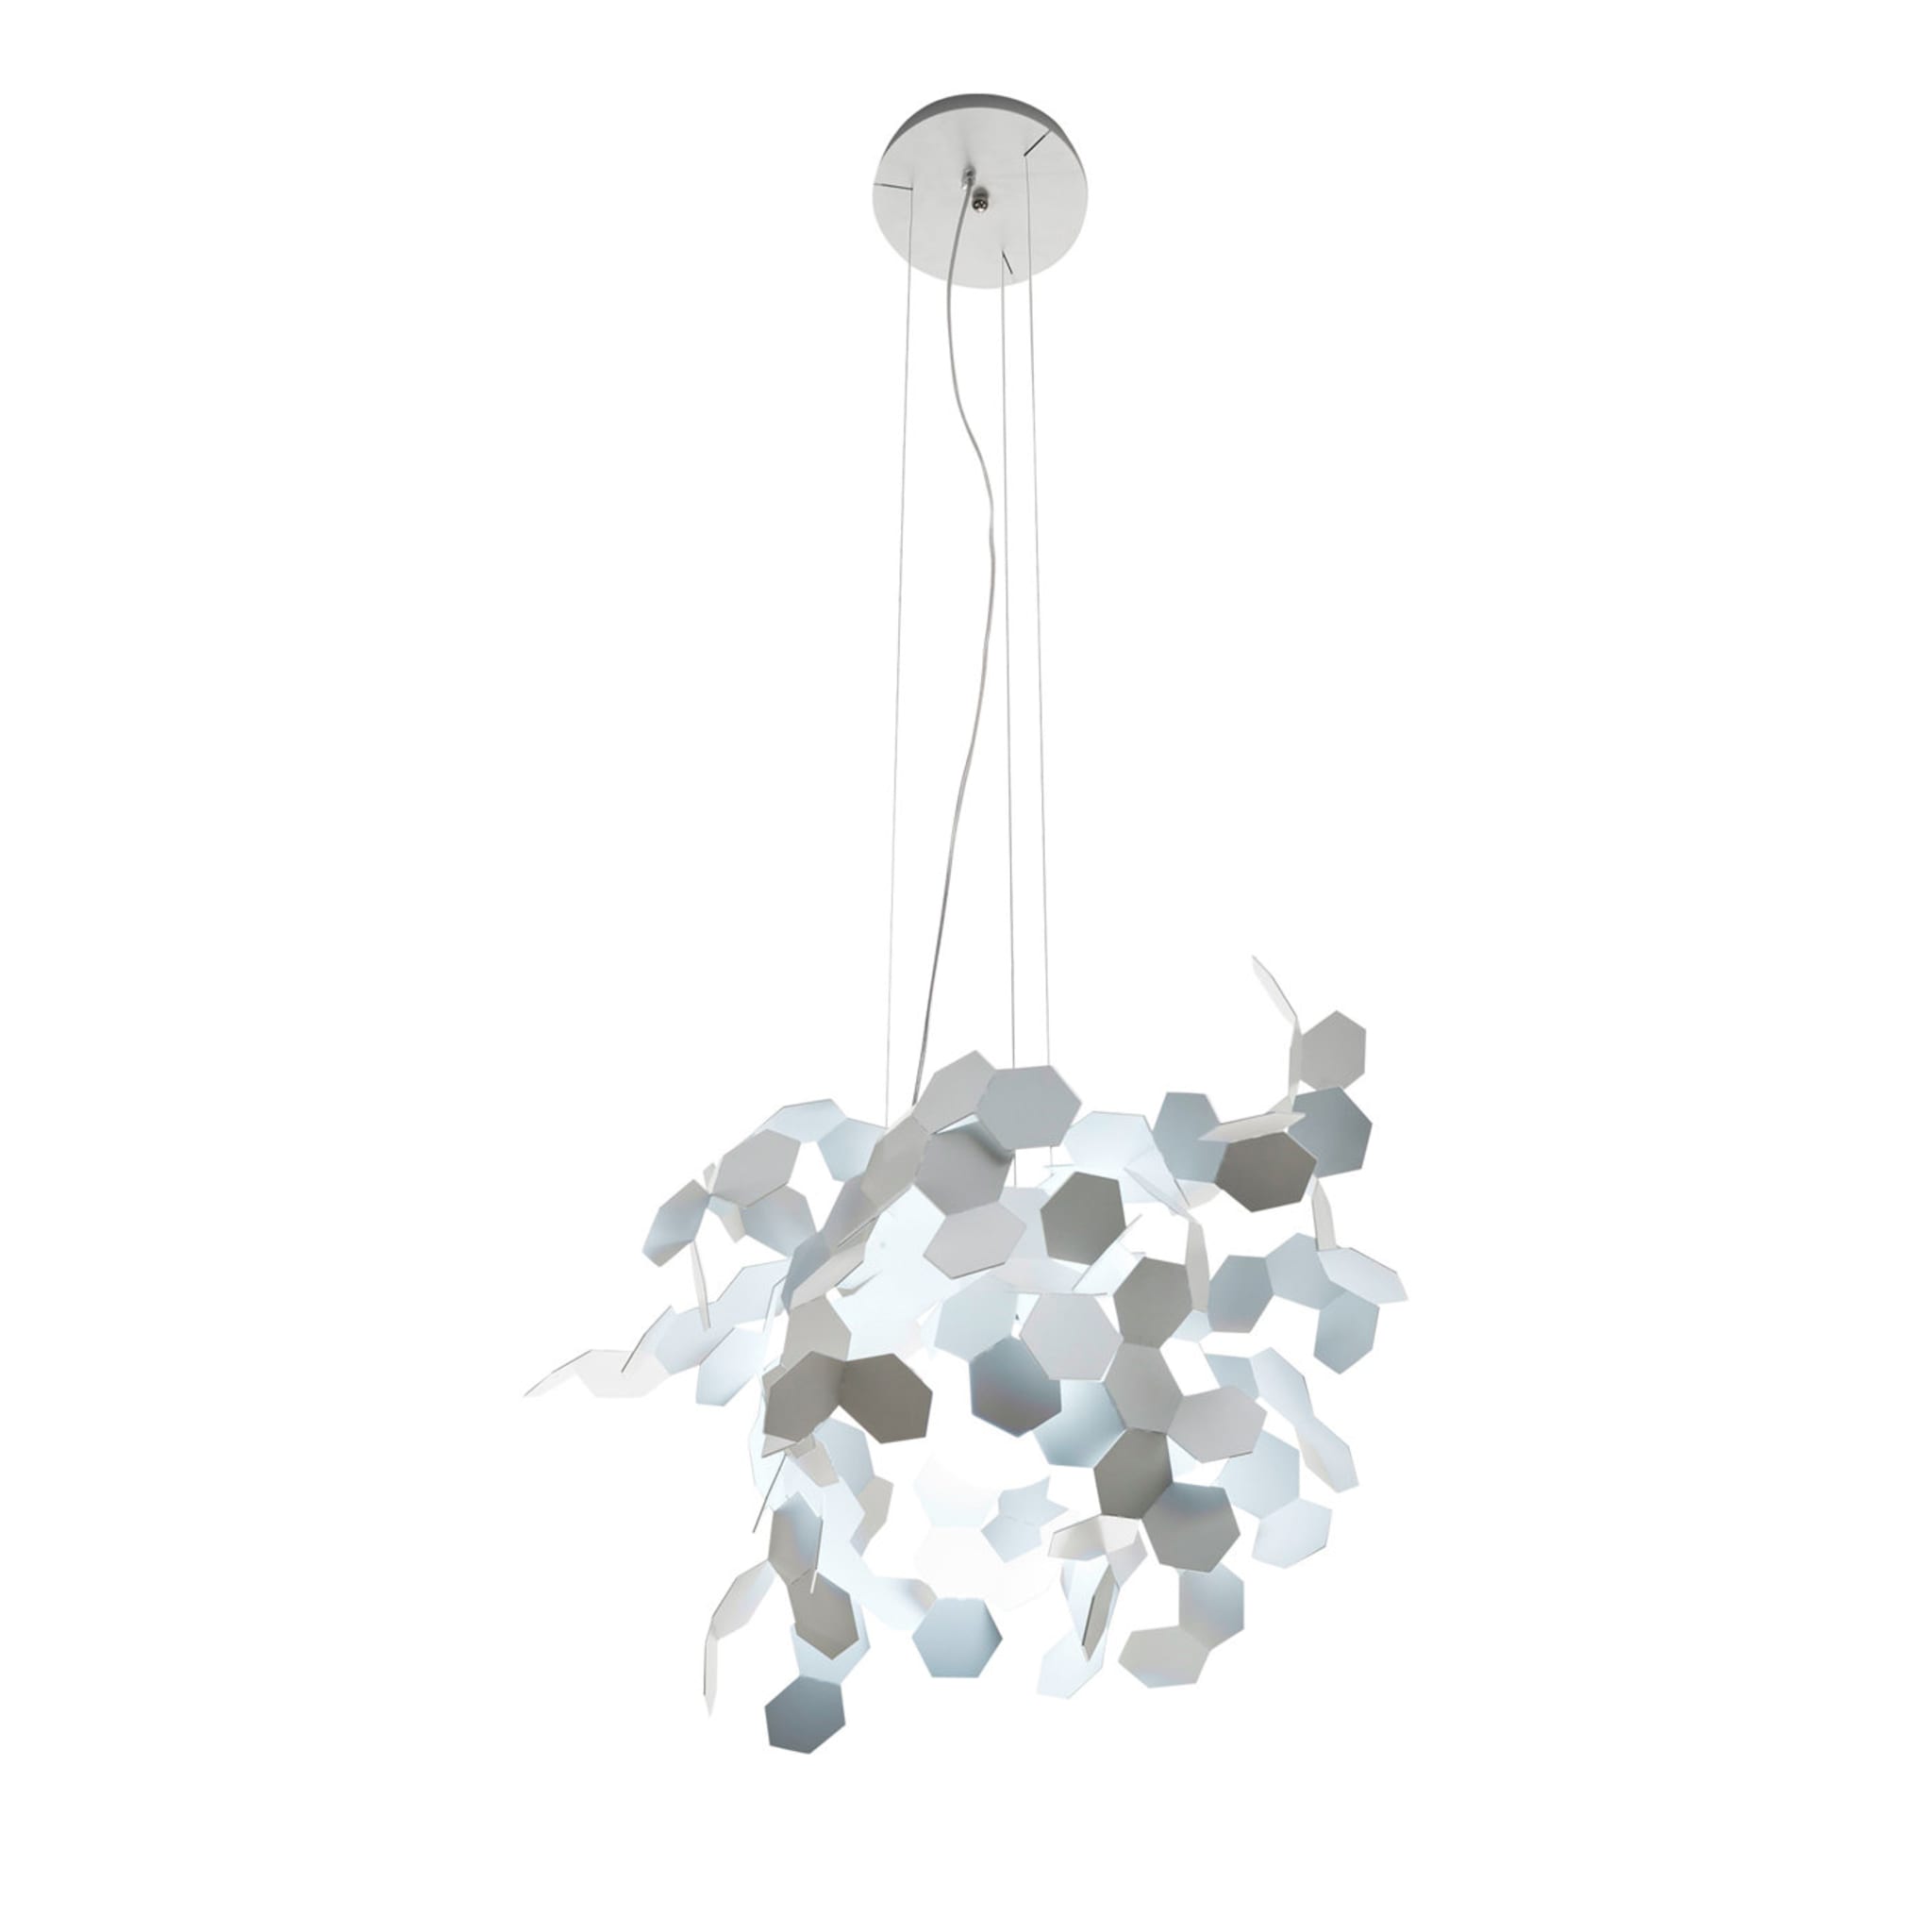 Andromeda White Suspension Lamp by Paolo Ulian - Main view